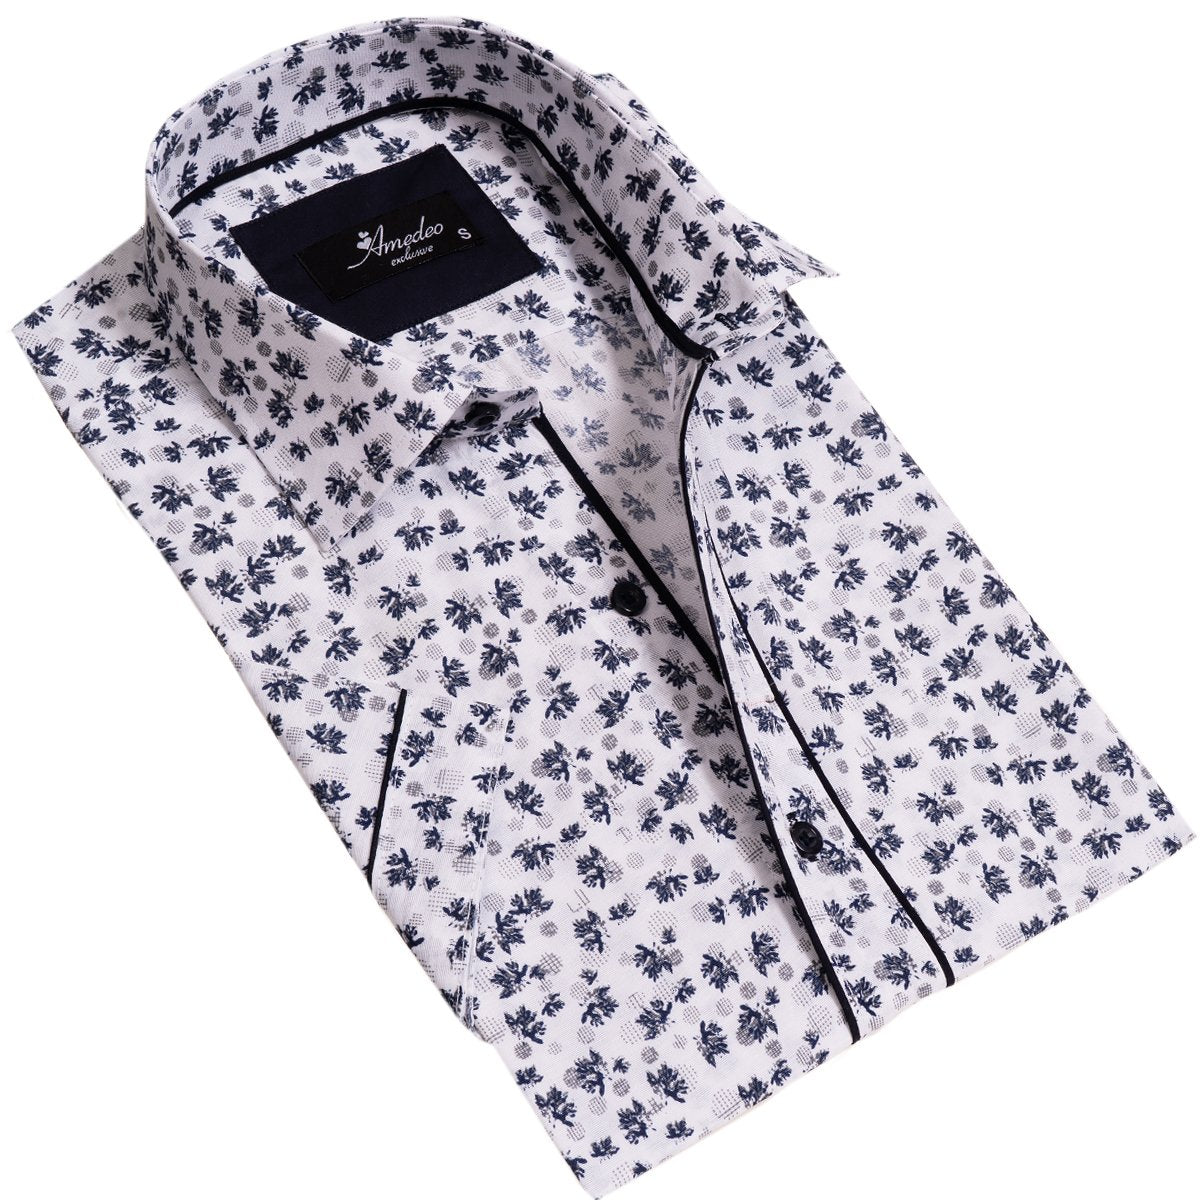 Picture of a Premium Men's Short Sleeve Button Up Shirt in White Print product only